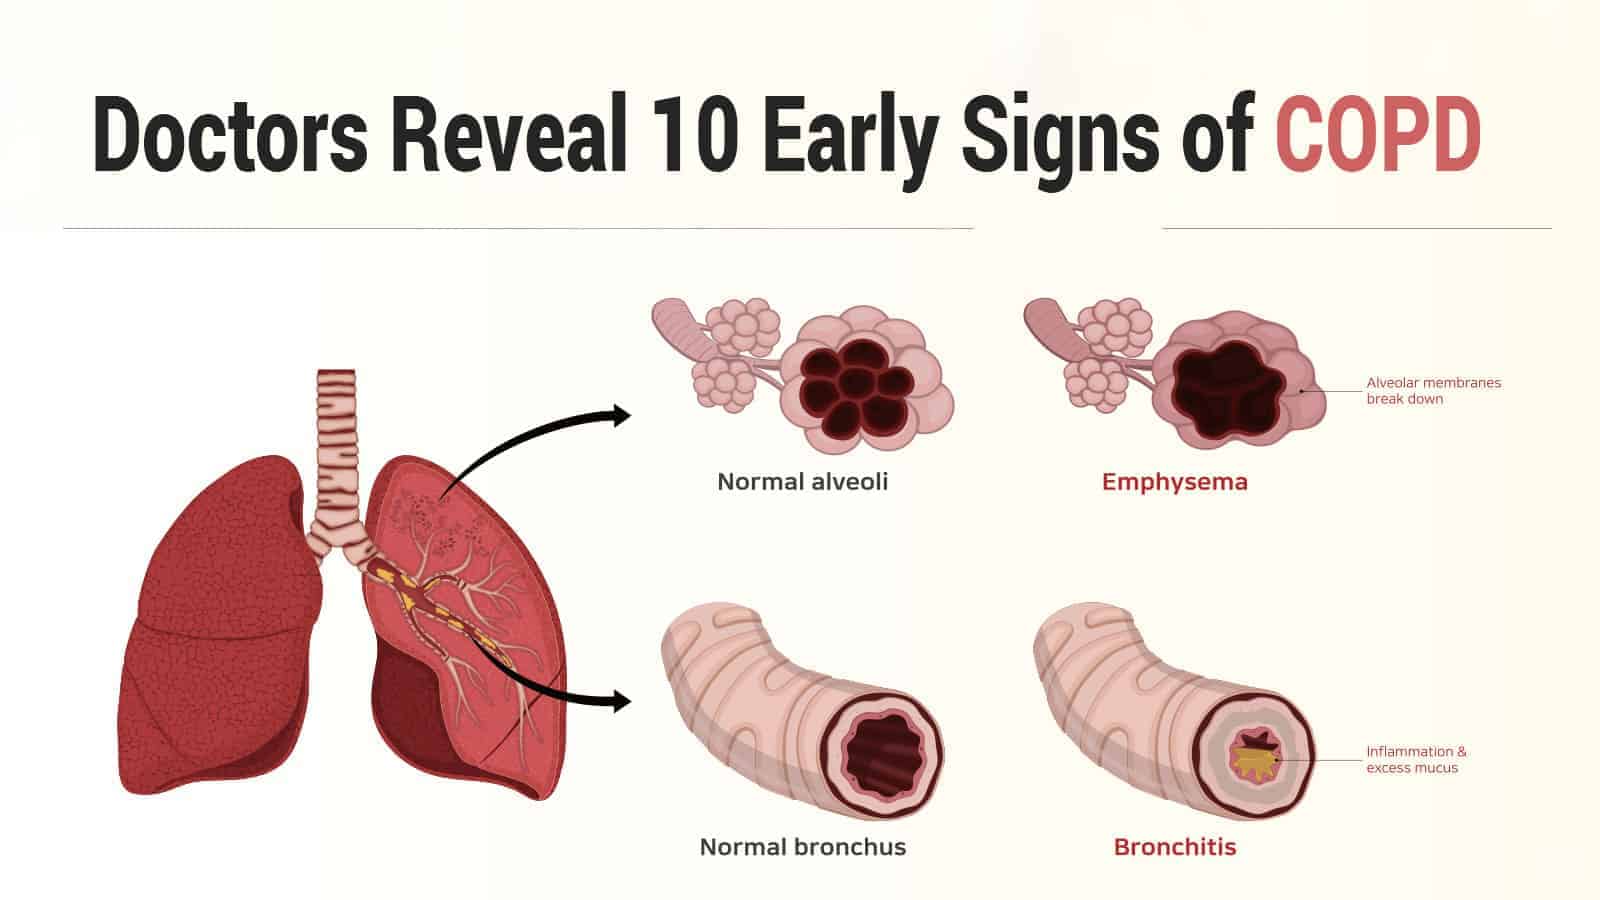 Doctors Reveal 10 Early Signs of COPD